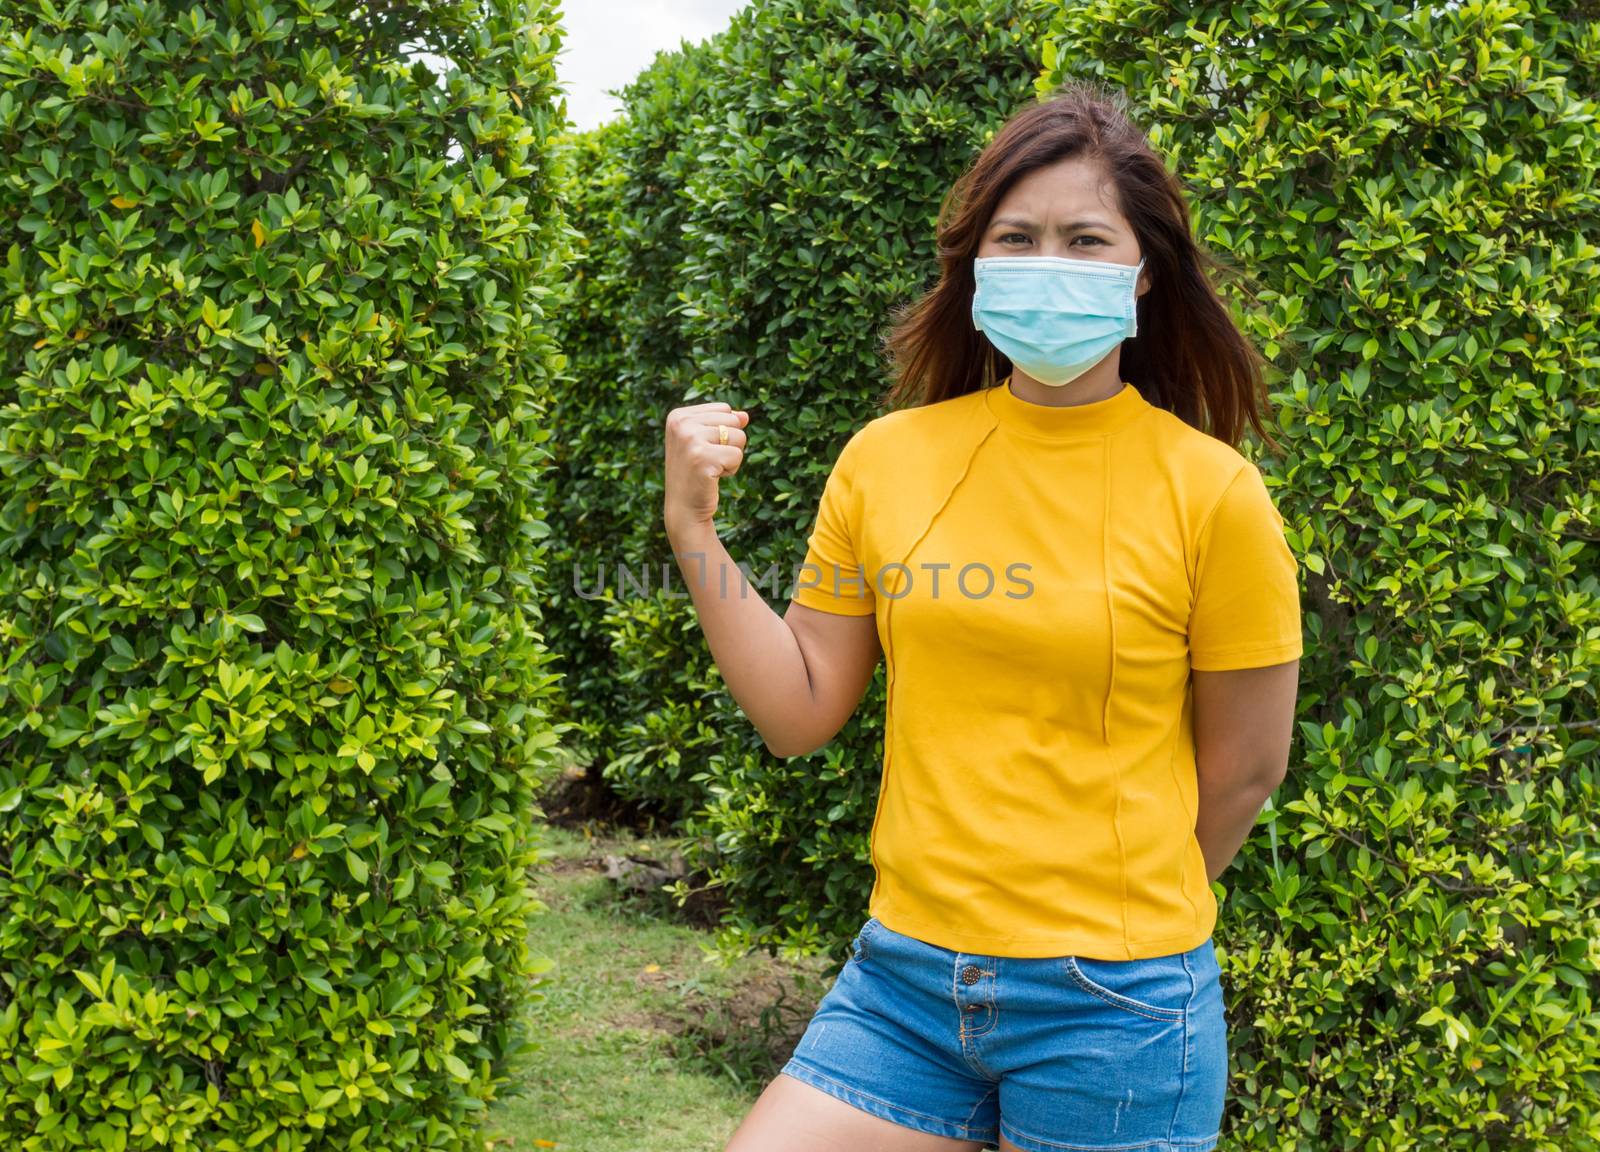 Portraits of women wearing protective masks During travel With a background of green trees